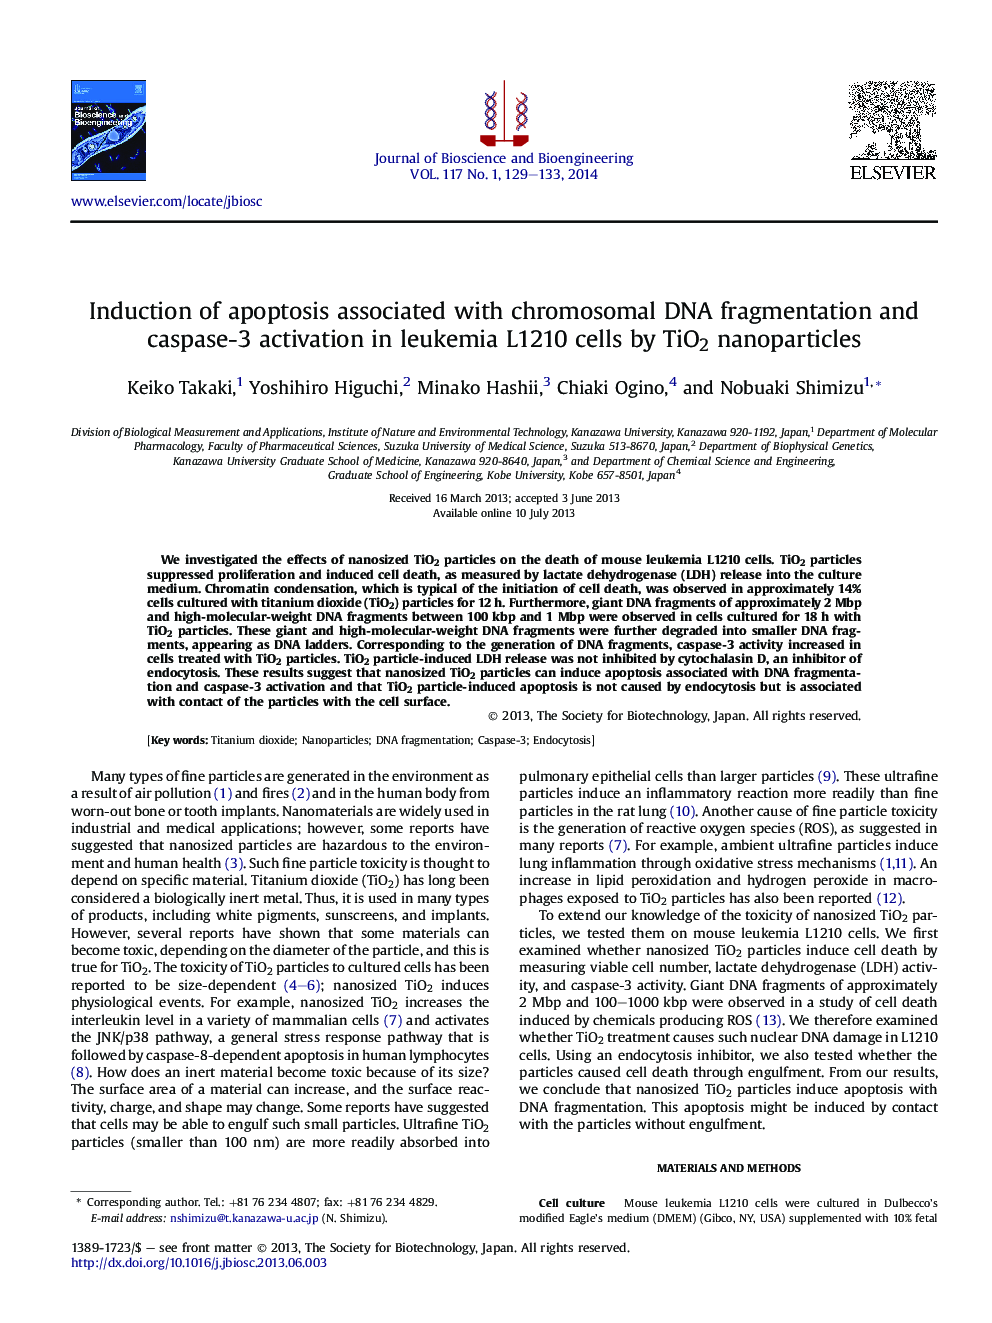 Induction of apoptosis associated with chromosomal DNA fragmentation and caspase-3 activation in leukemia L1210 cells by TiO2 nanoparticles